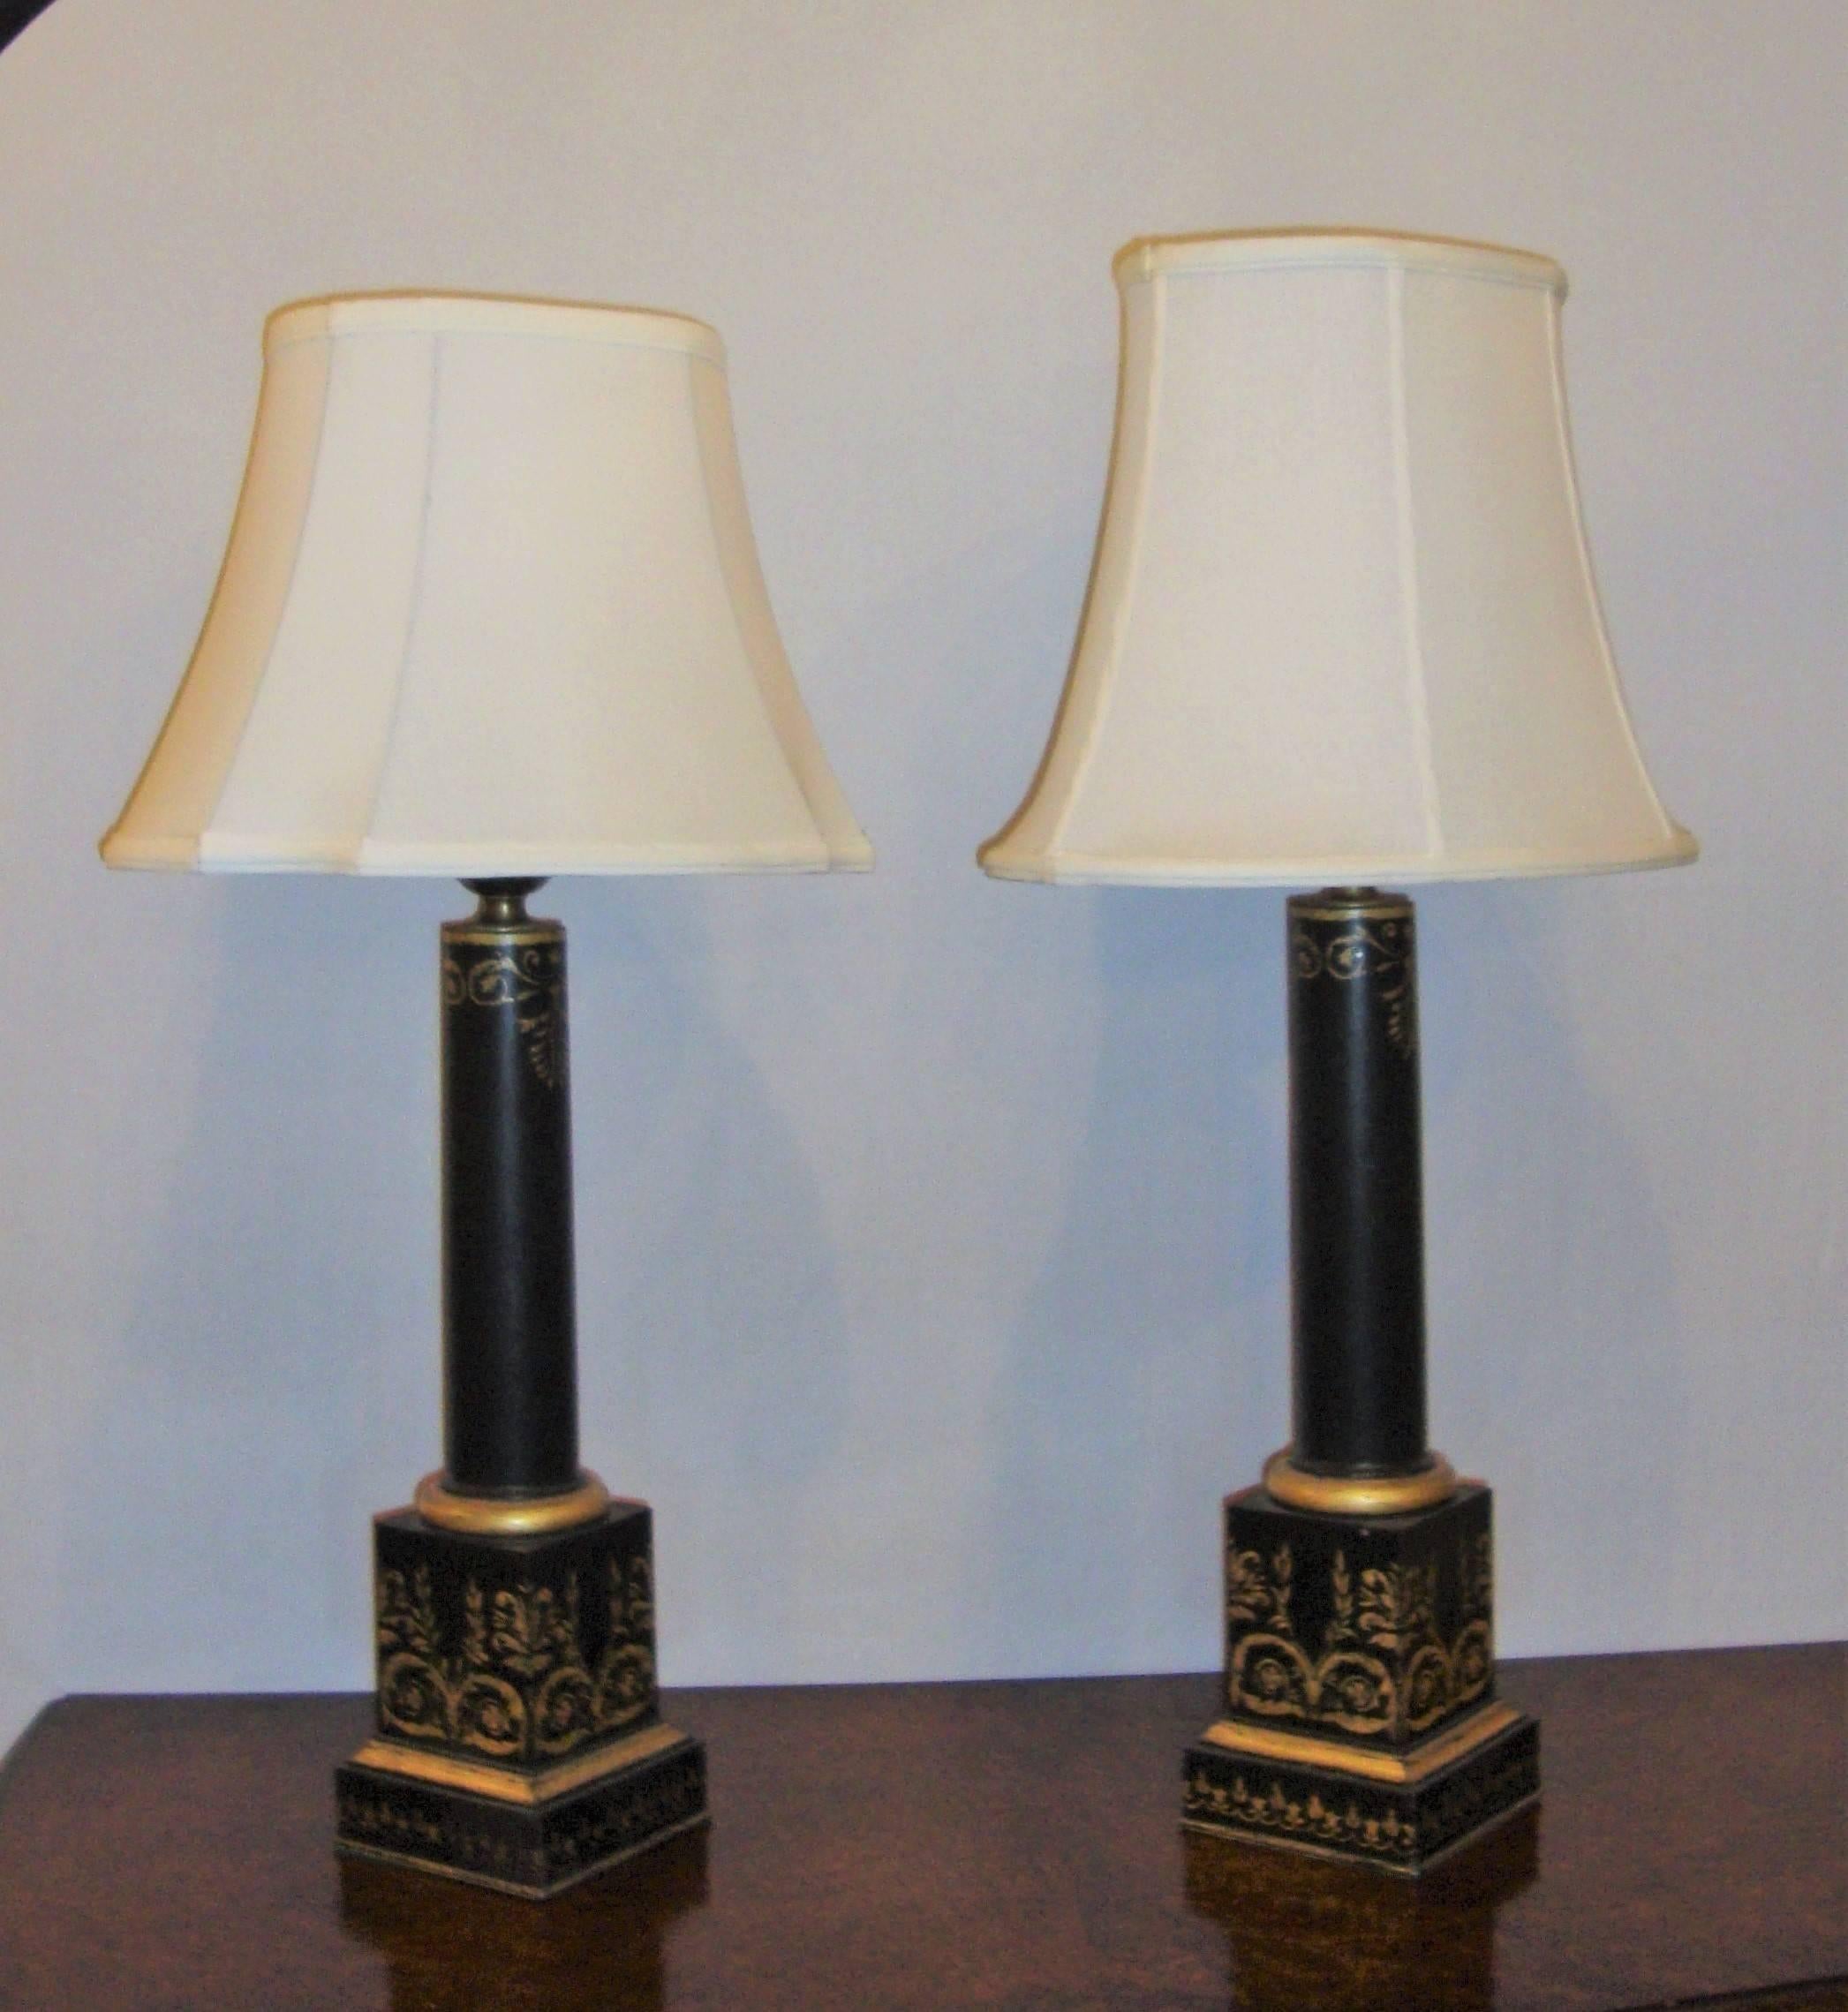 American Empire Pair of Antique Tole Painted Ebonized and Gilt Decorated Empire Style Lamps